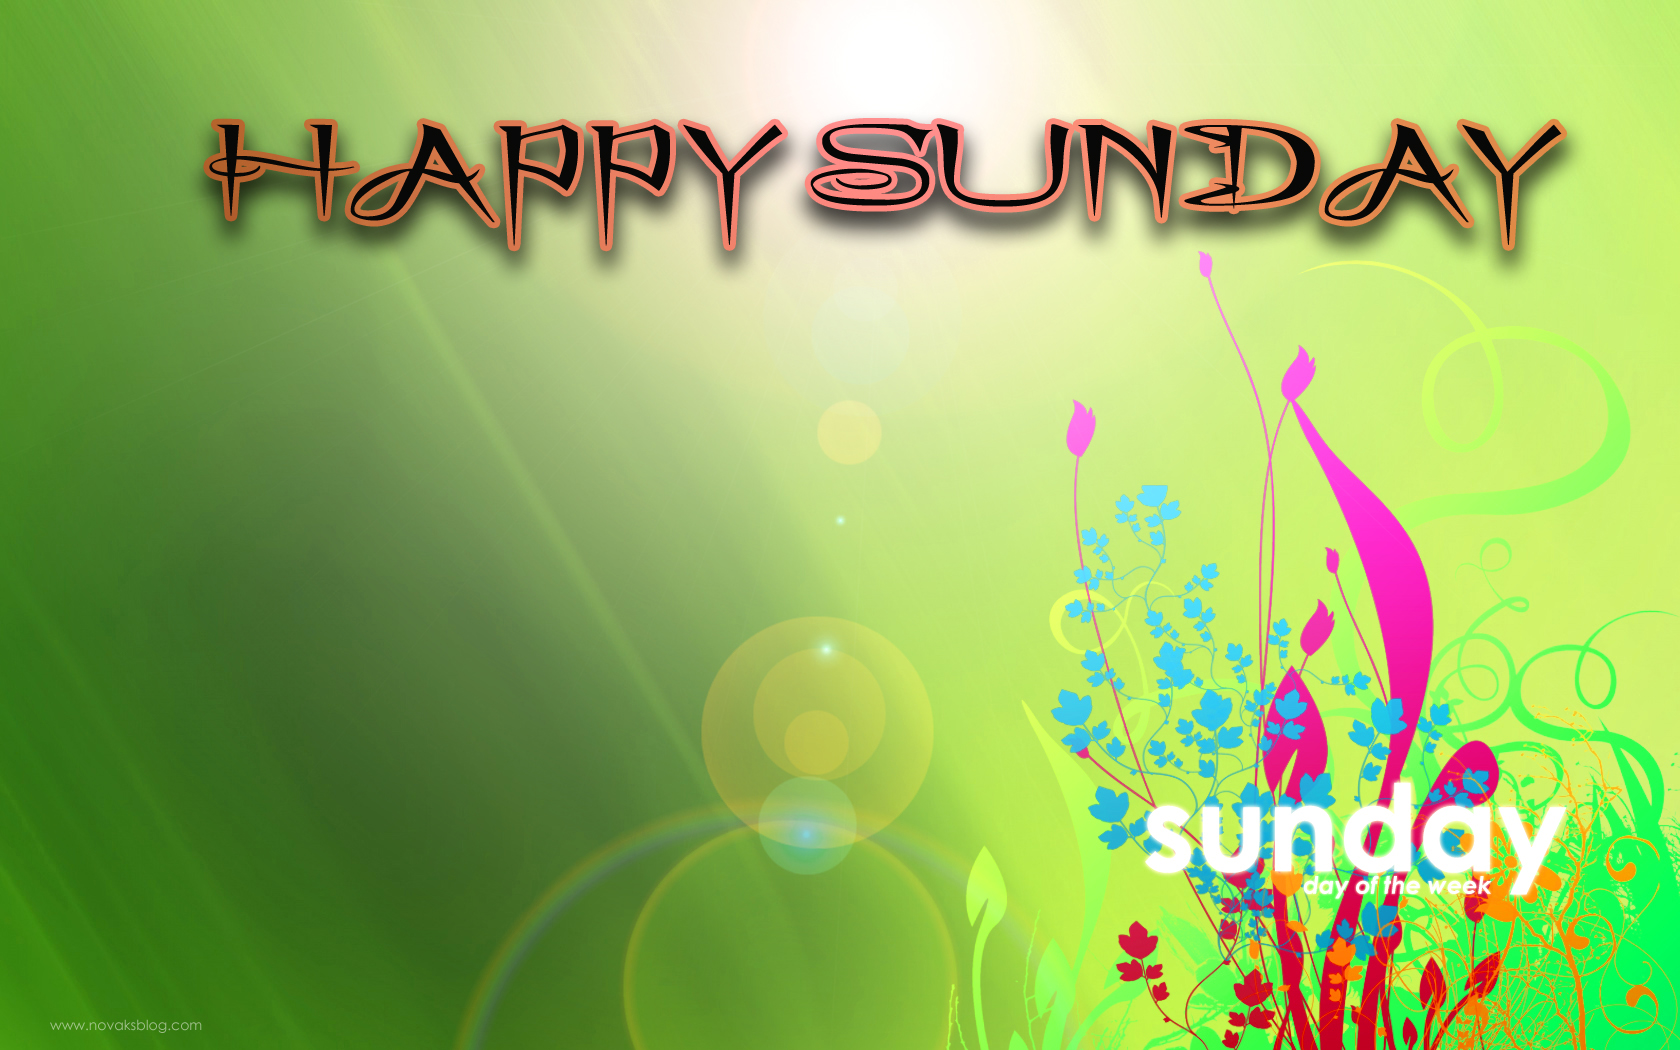 Really Awesome Happy Sunday Wallpaper You Can Fixed It On Your Laptop